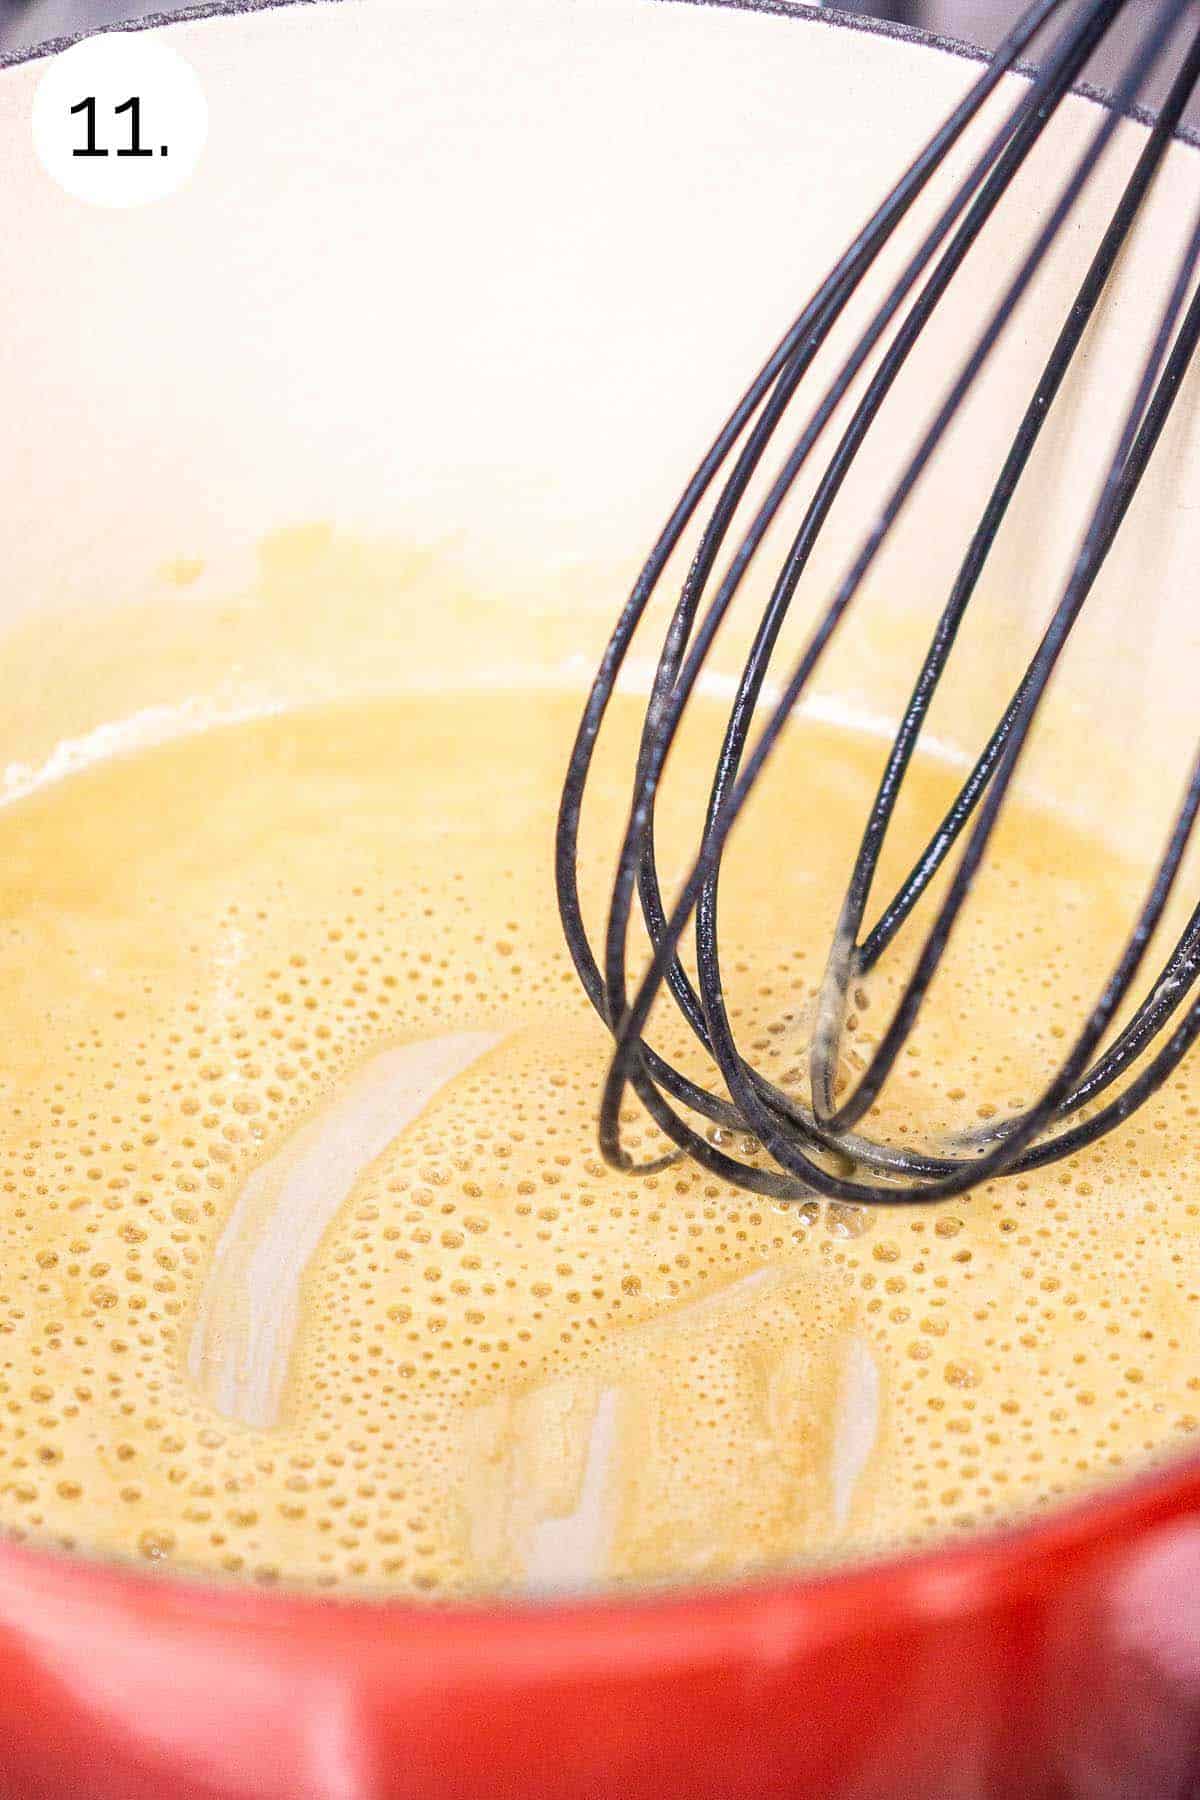 Whisking together butter and flour in a small Dutch oven on the stove to make the roux.